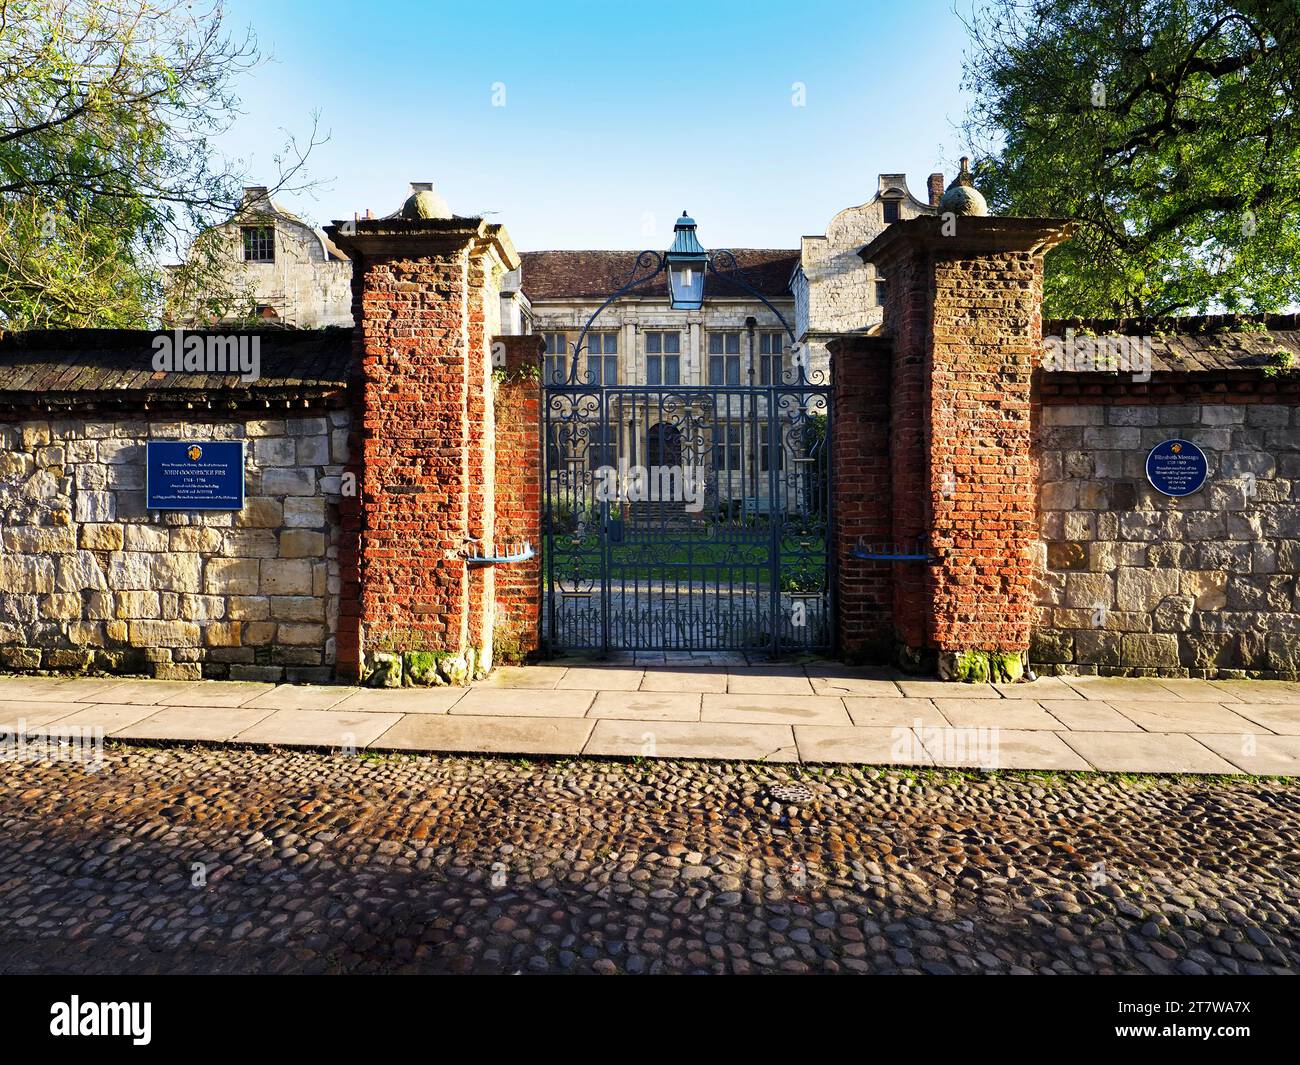 Gate piers and gate to the Treasurers House on Minster Yard in the City of York Yorkshire England Stock Photo